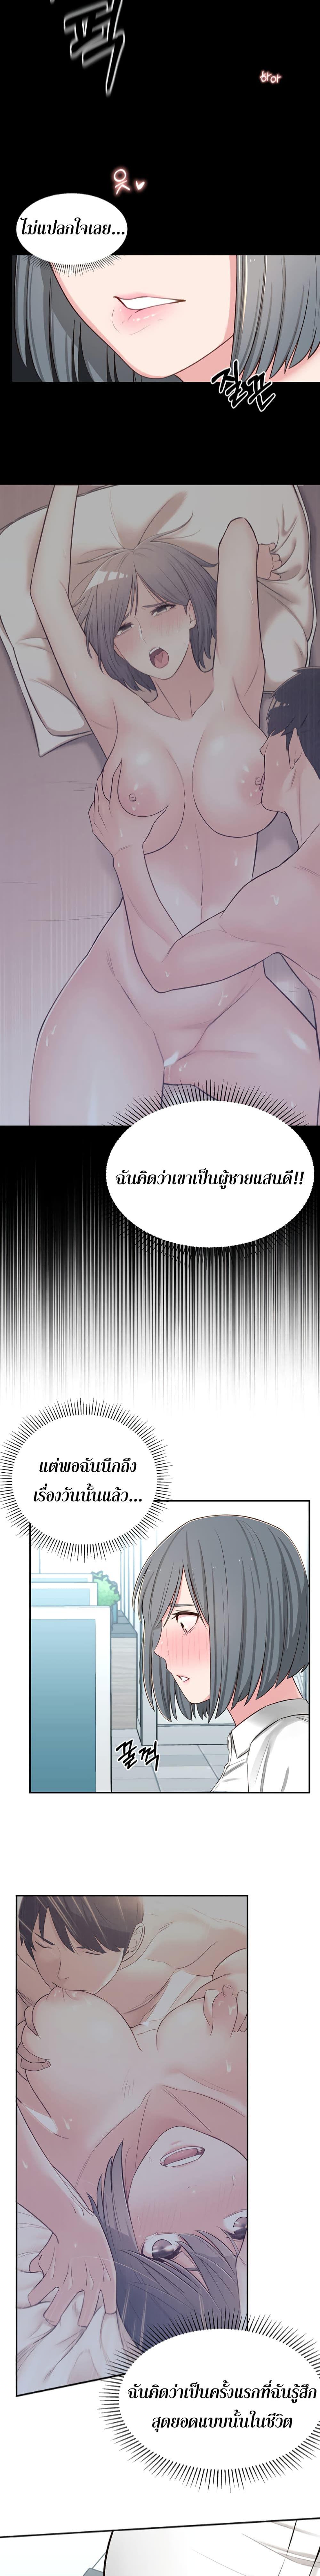 A Knowing Sister 6 ภาพ 7